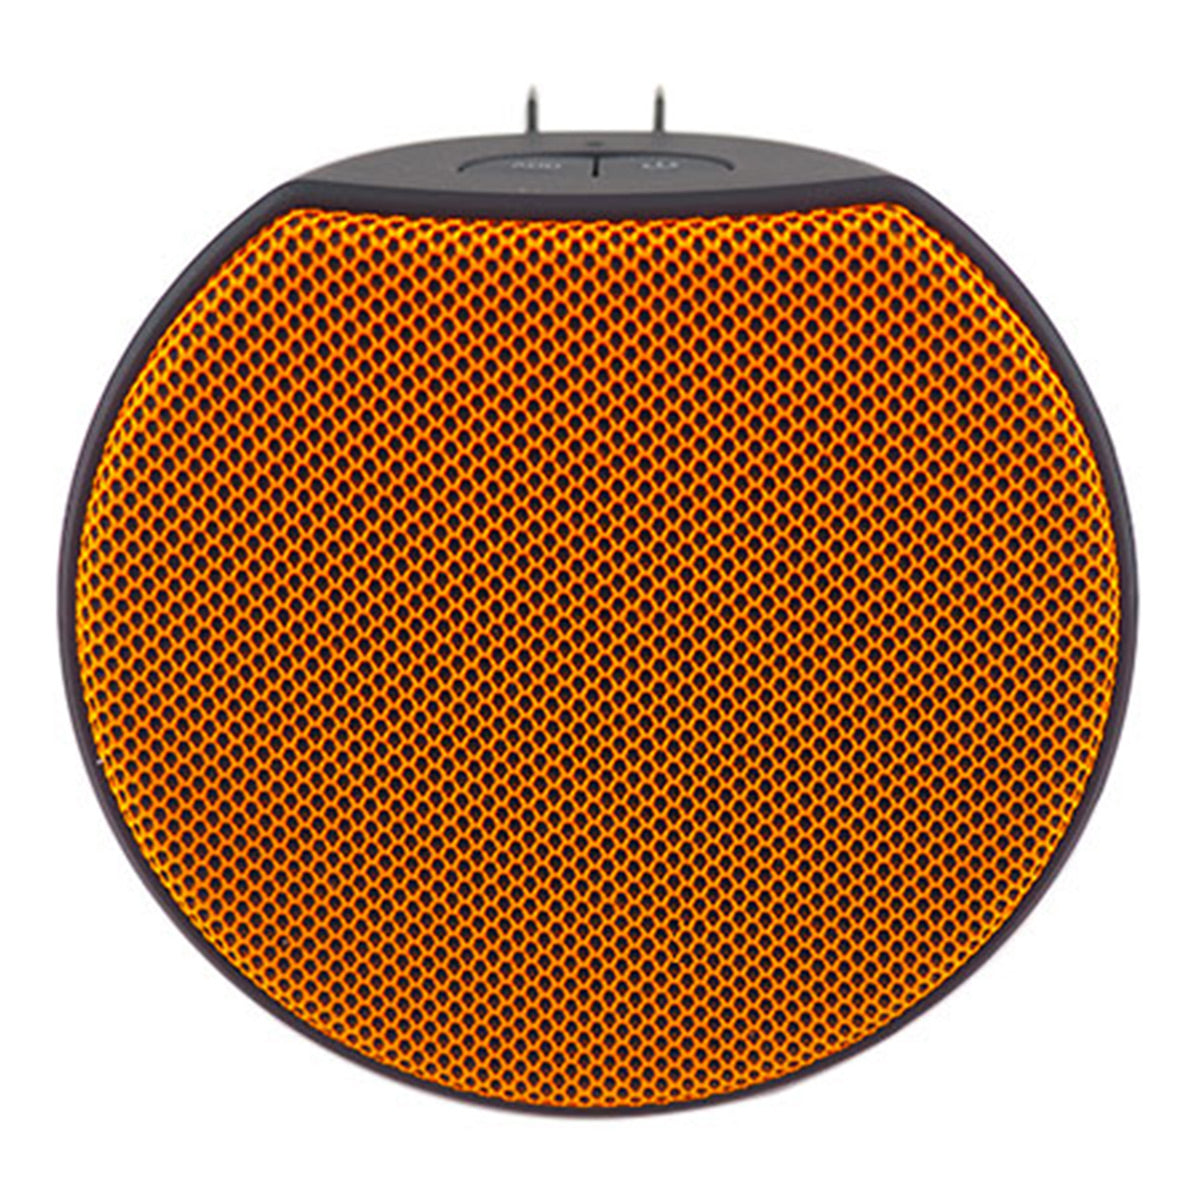 OC Acoustic Newport Plug-in Outlet Speaker with Bluetooth 5.1 and Built-in USB Type-A Charging Port - Pair (Orange/Black)